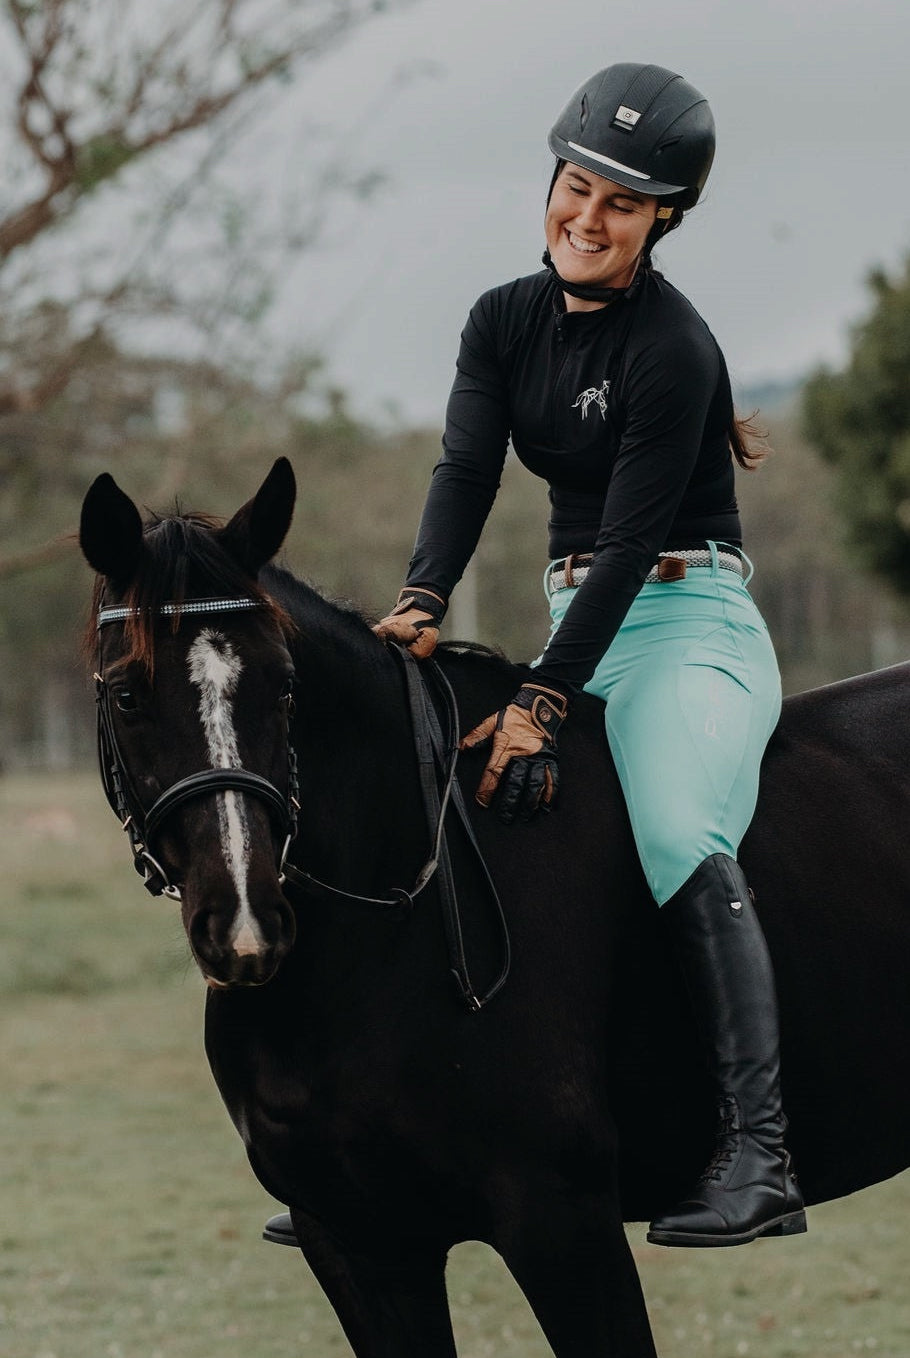 A person wearing a helmet, gloves, a black long-sleeve shirt, and Pure Canter's Fusion Tights - Aqua is smiling while sitting on a black horse. The horse has a white stripe on its face. The background is a grassy area with trees and a slightly cloudy sky, embodying the essence of equestrian fashion.